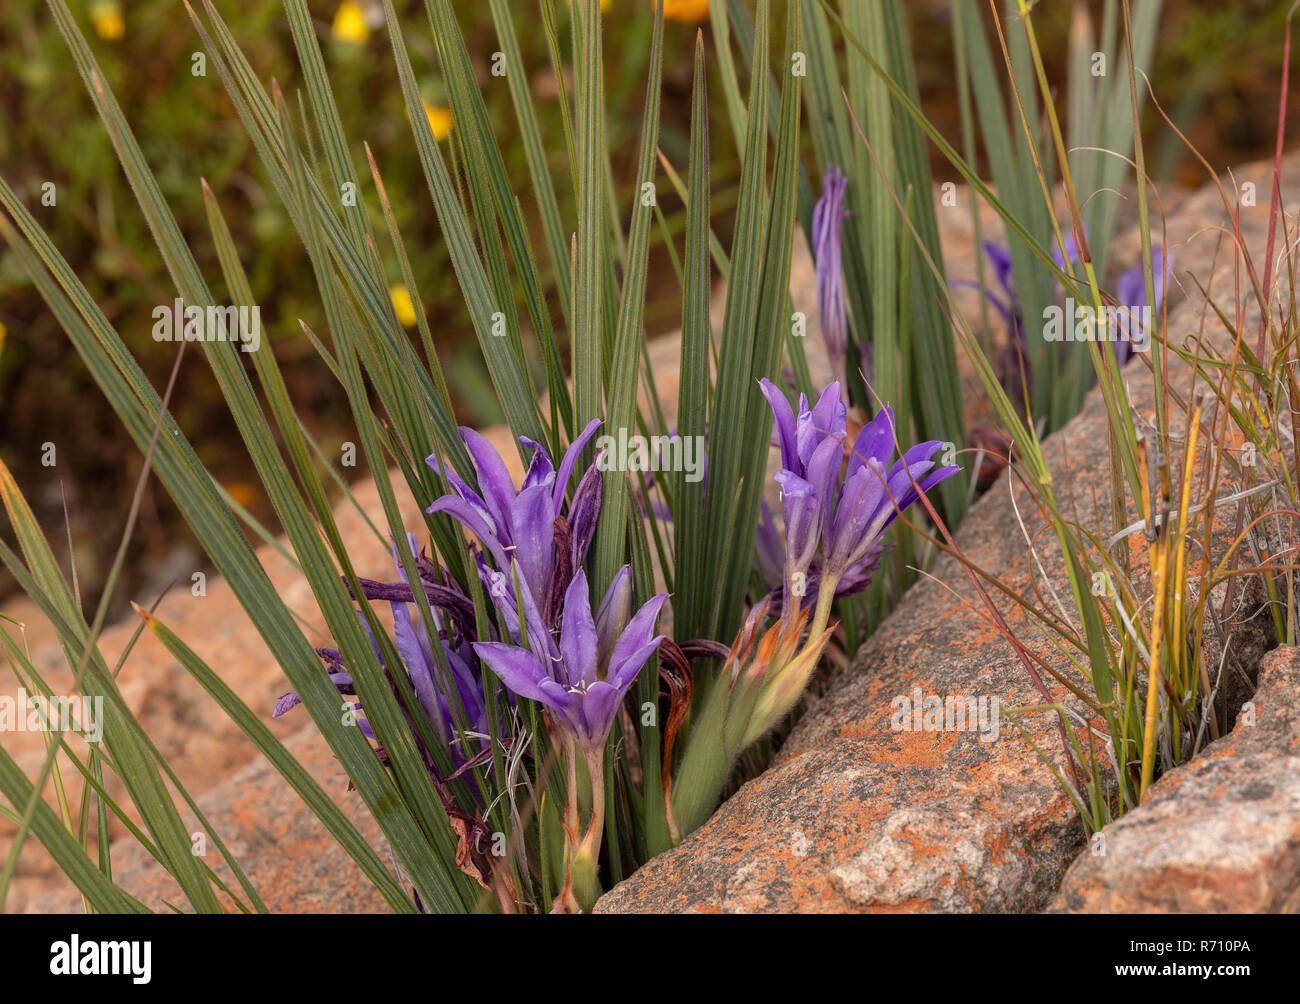 A Baboon flower, Babiana framesii growing in a rock crevice, in flower at Matjiesfontein, Nieuwoudtville, Western Cape, South Africa. Stock Photo